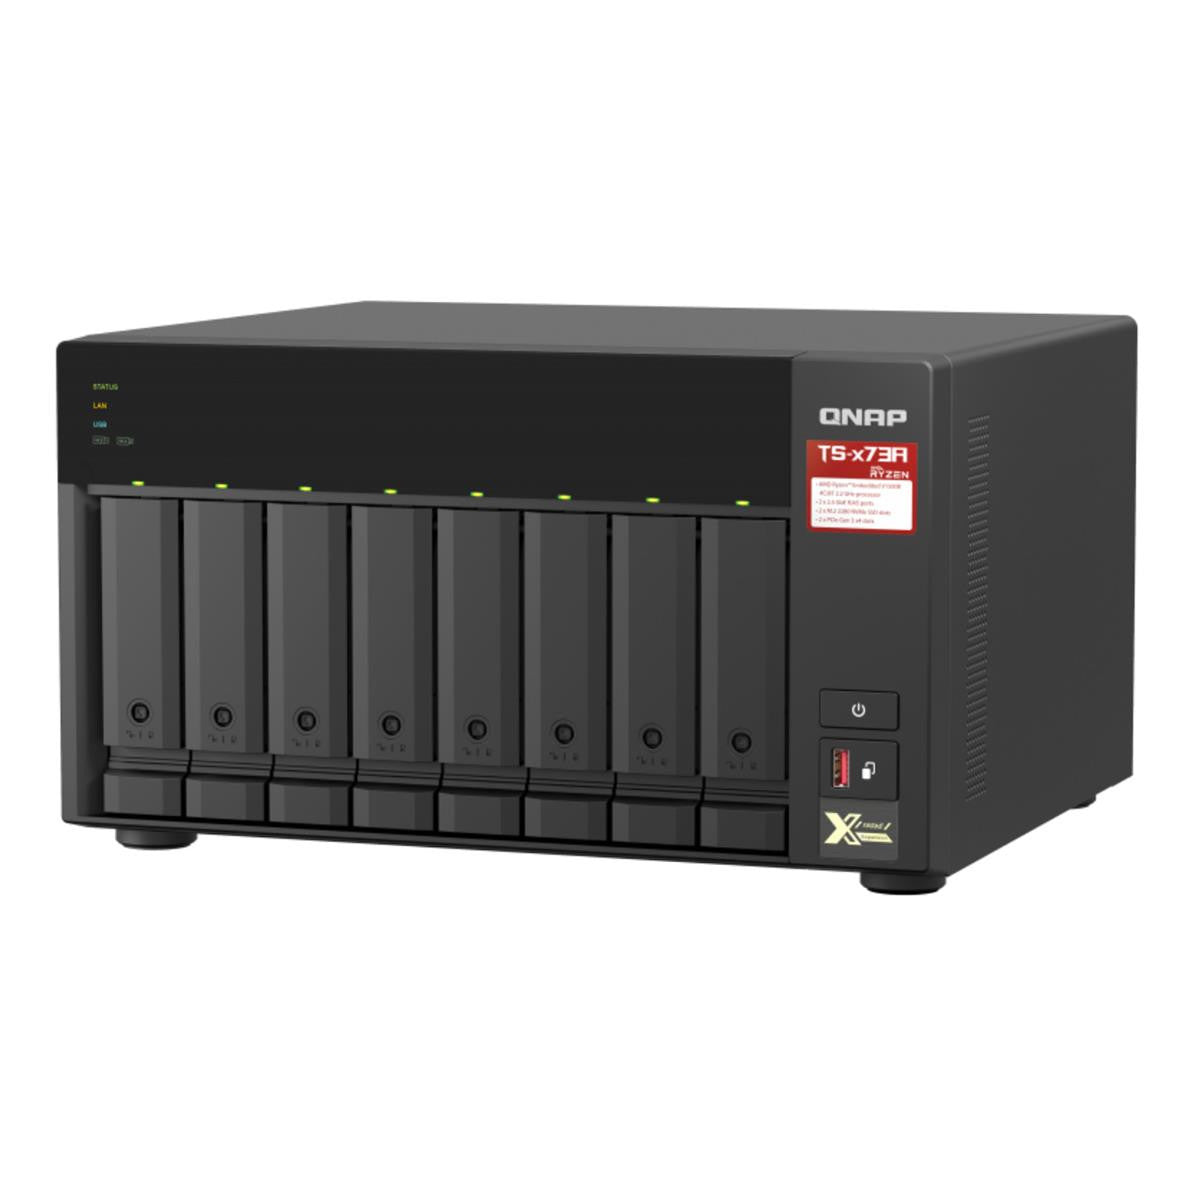 QNAP TS-873A 8-BAY NAS with 64GB DDR4 RAM and 64TB (8x8TB) Western Digital RED PLUS Drives Fully Assembled and Tested